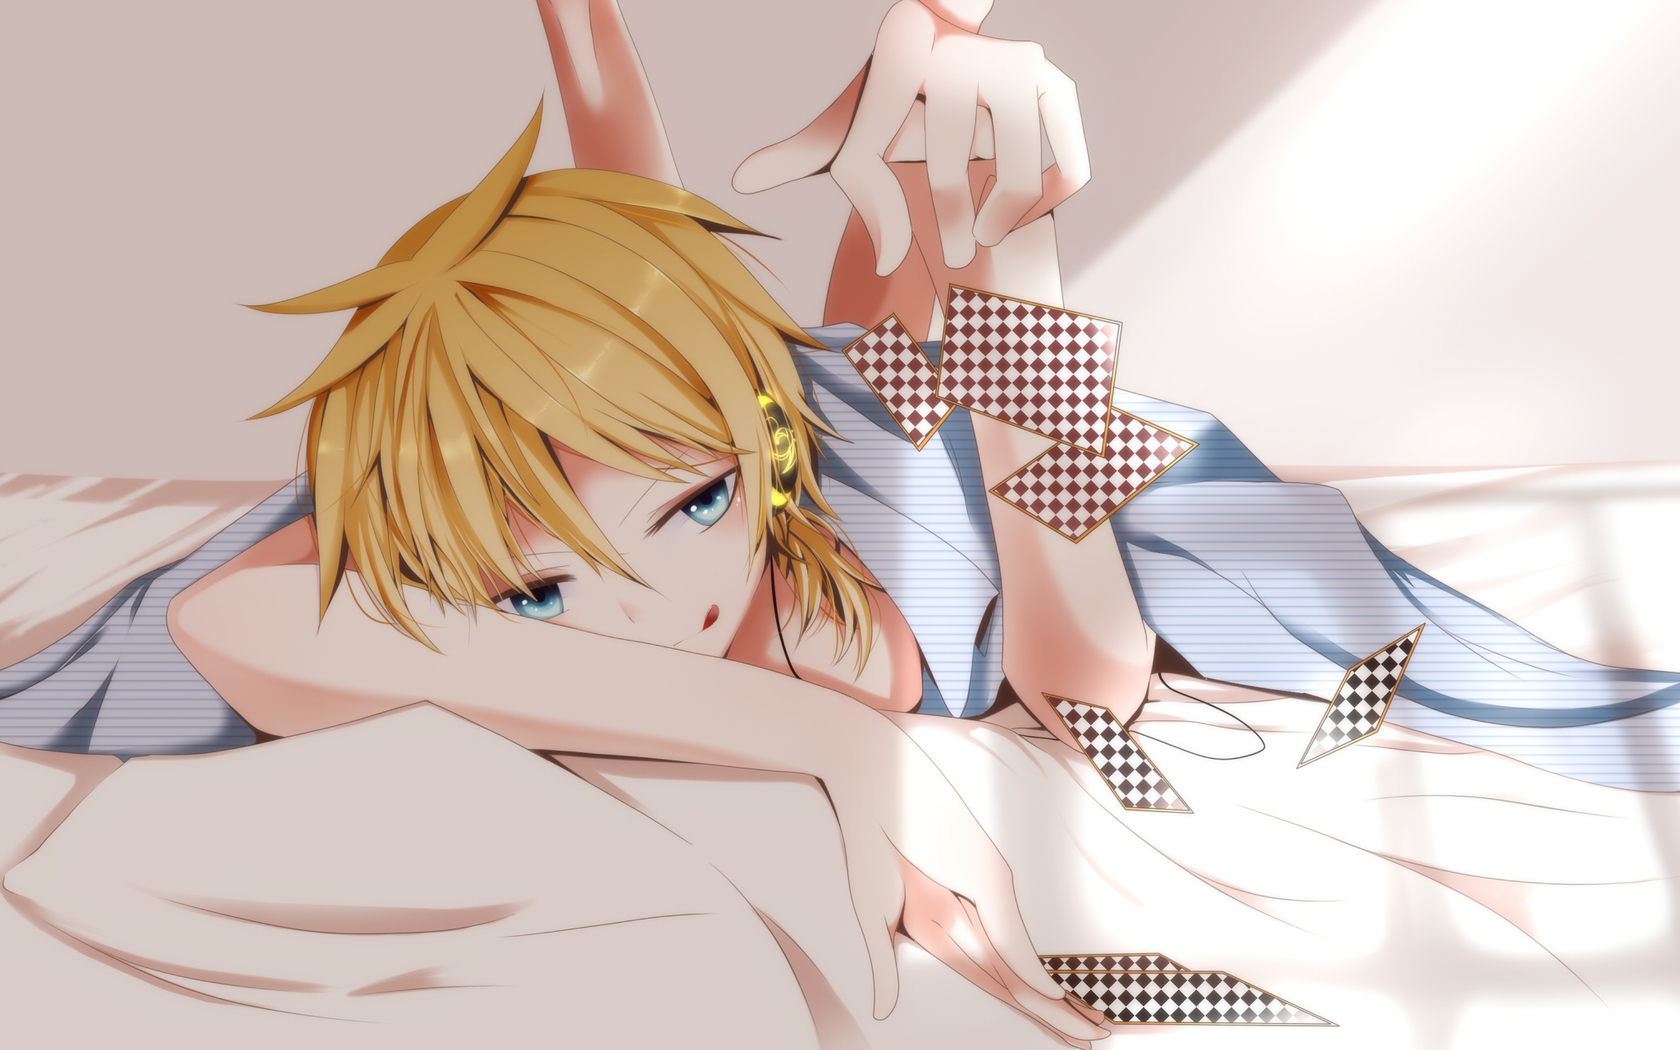 Anime 1680x1050 cards anime anime girls Vocaloid Kagamine Len blonde tongues tongue out playing cards blue eyes